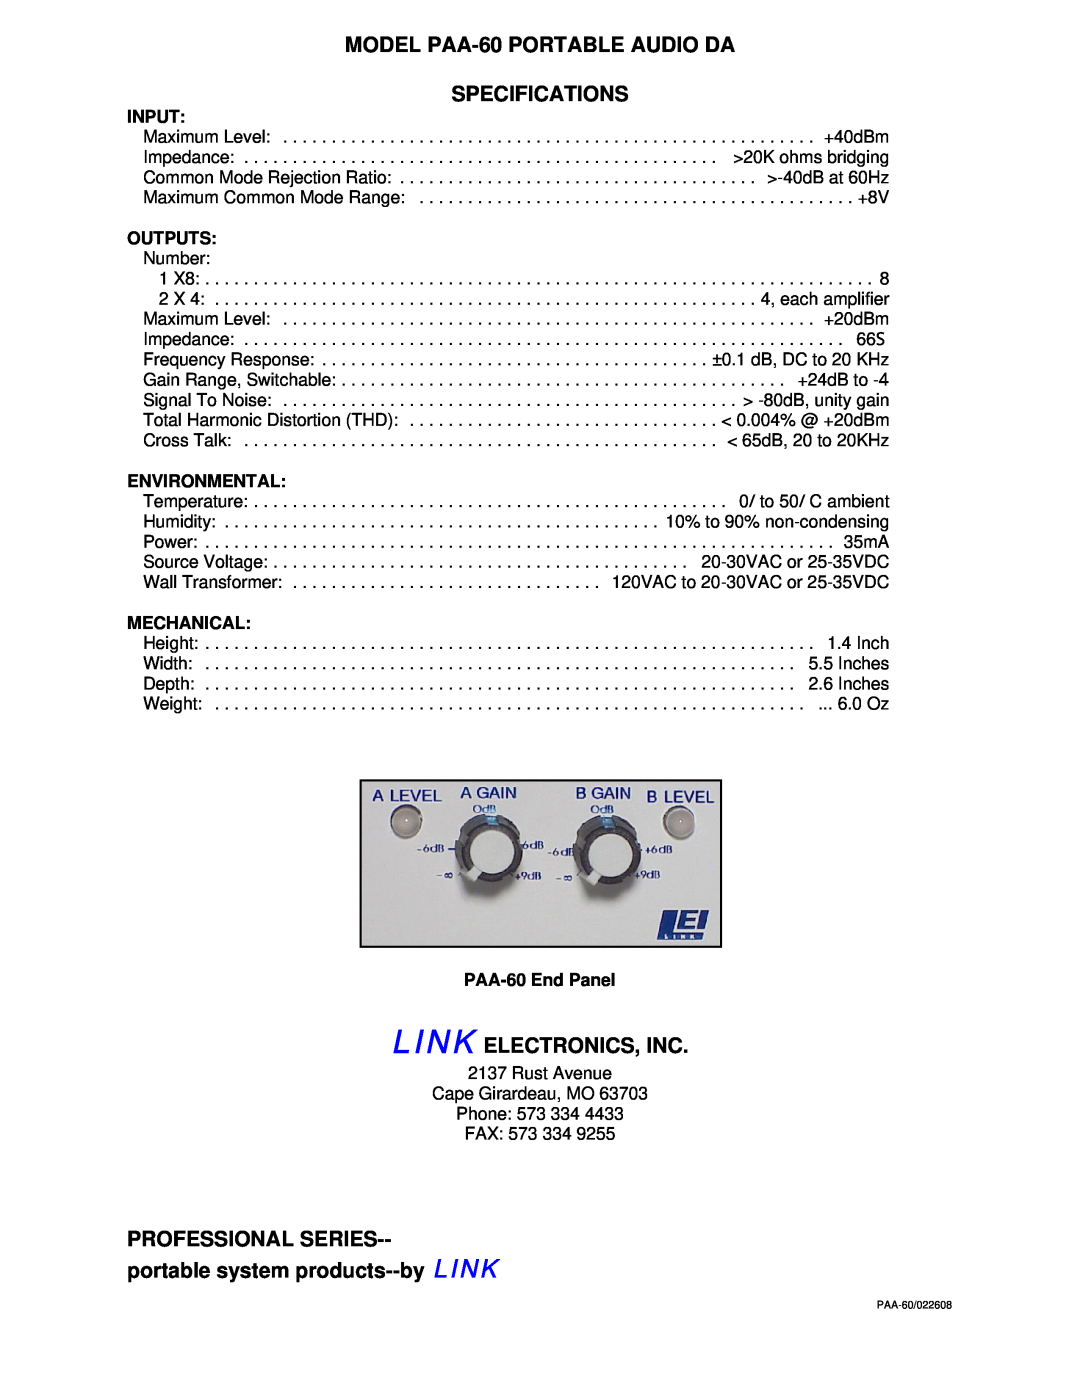 Link electronic Input, Outputs, Environmental, Mechanical, PAA-60End Panel, Link Electronics, Inc, Professional Series 